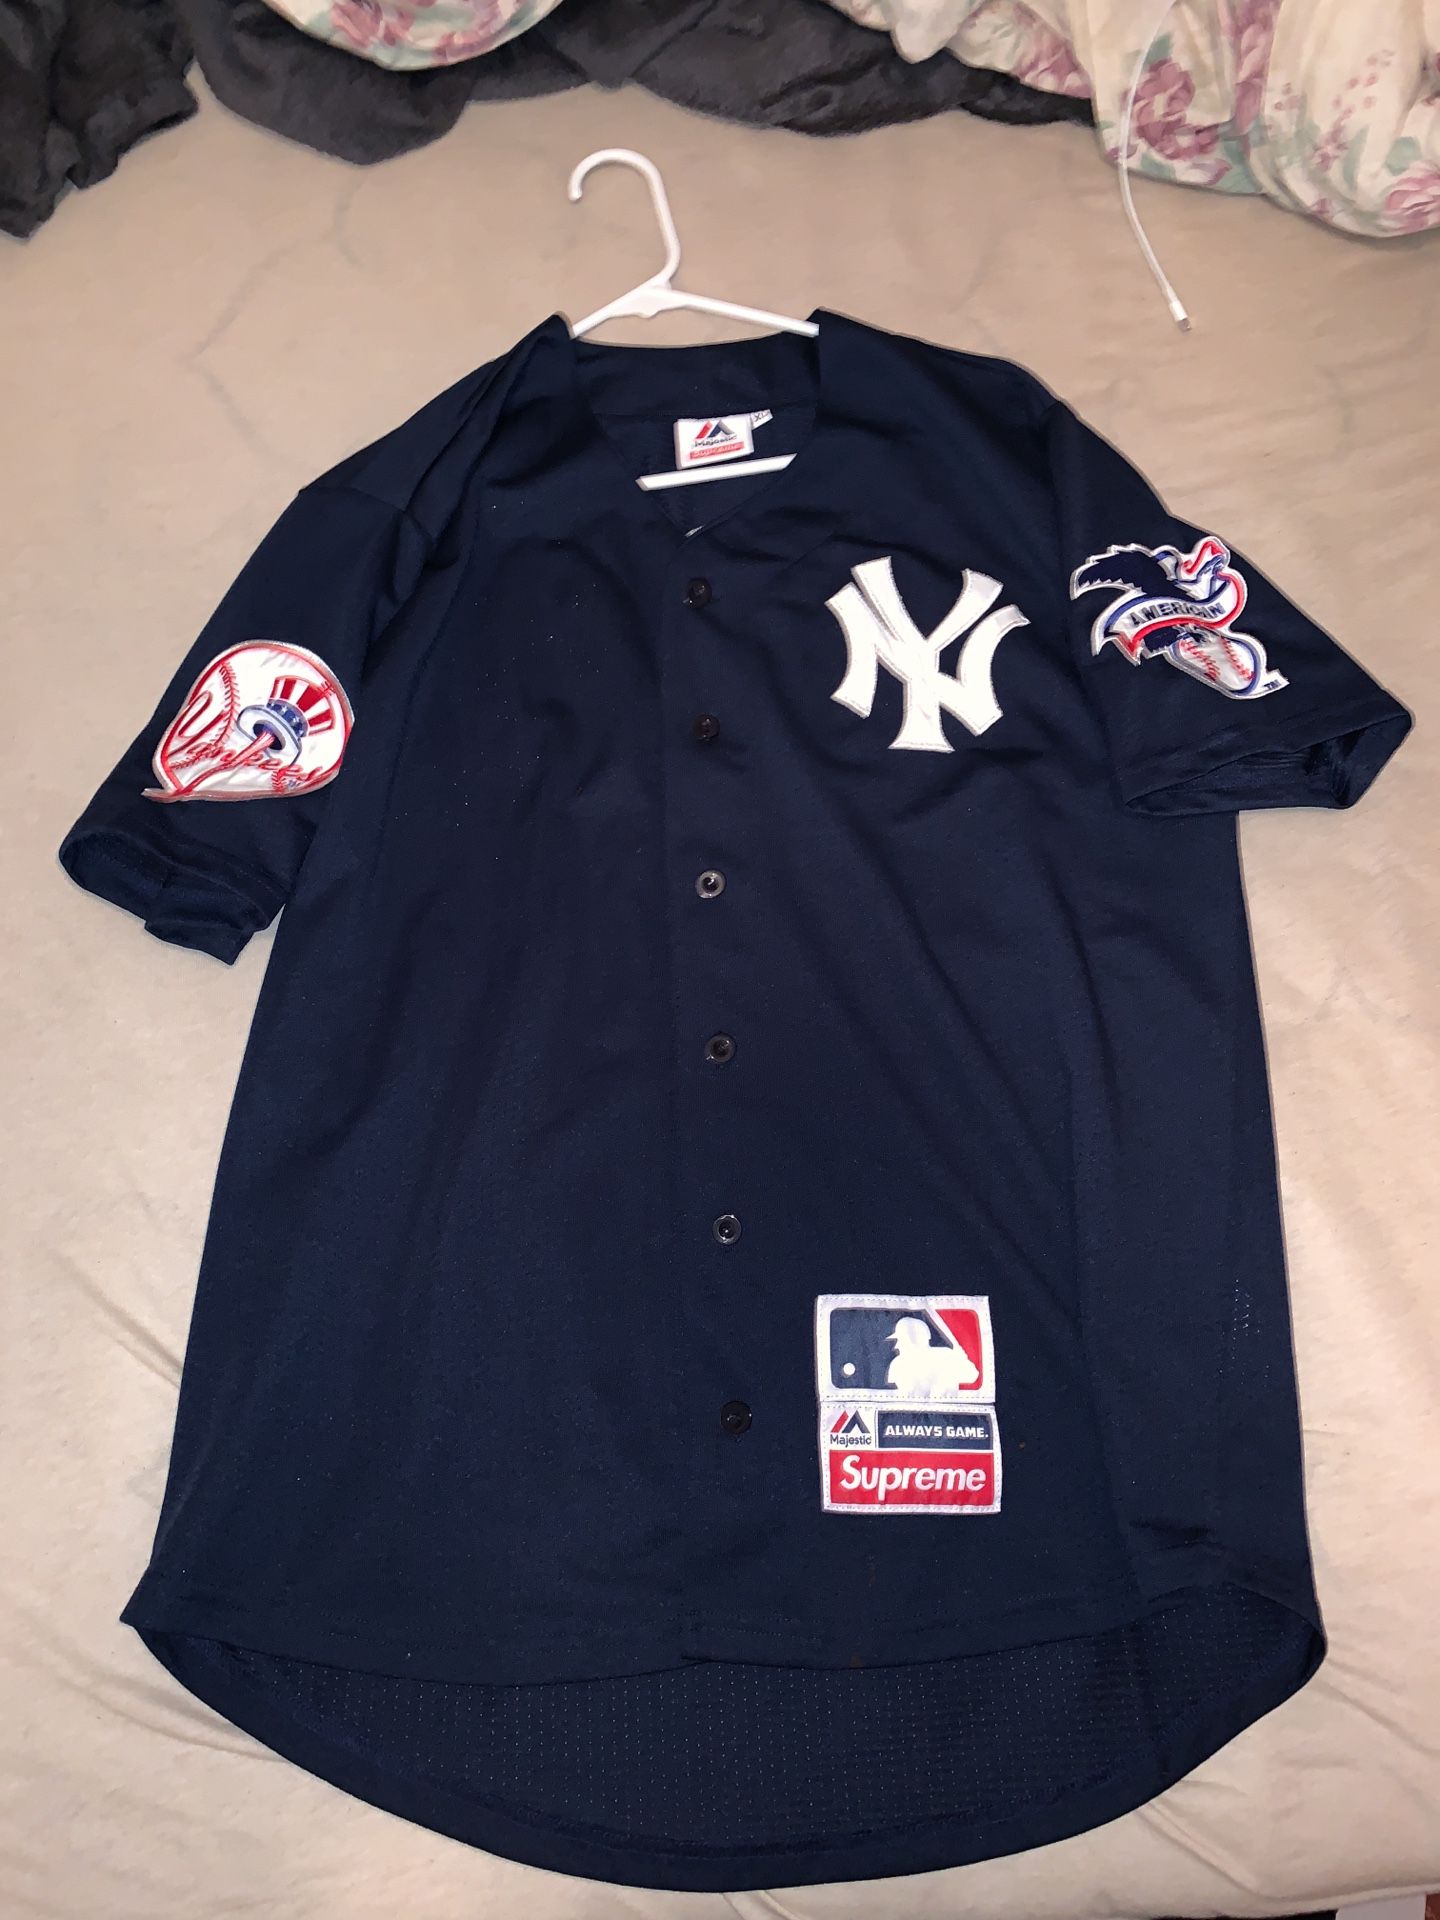 Supreme New York Yankees Jersey for Sale in Bloomington, CA